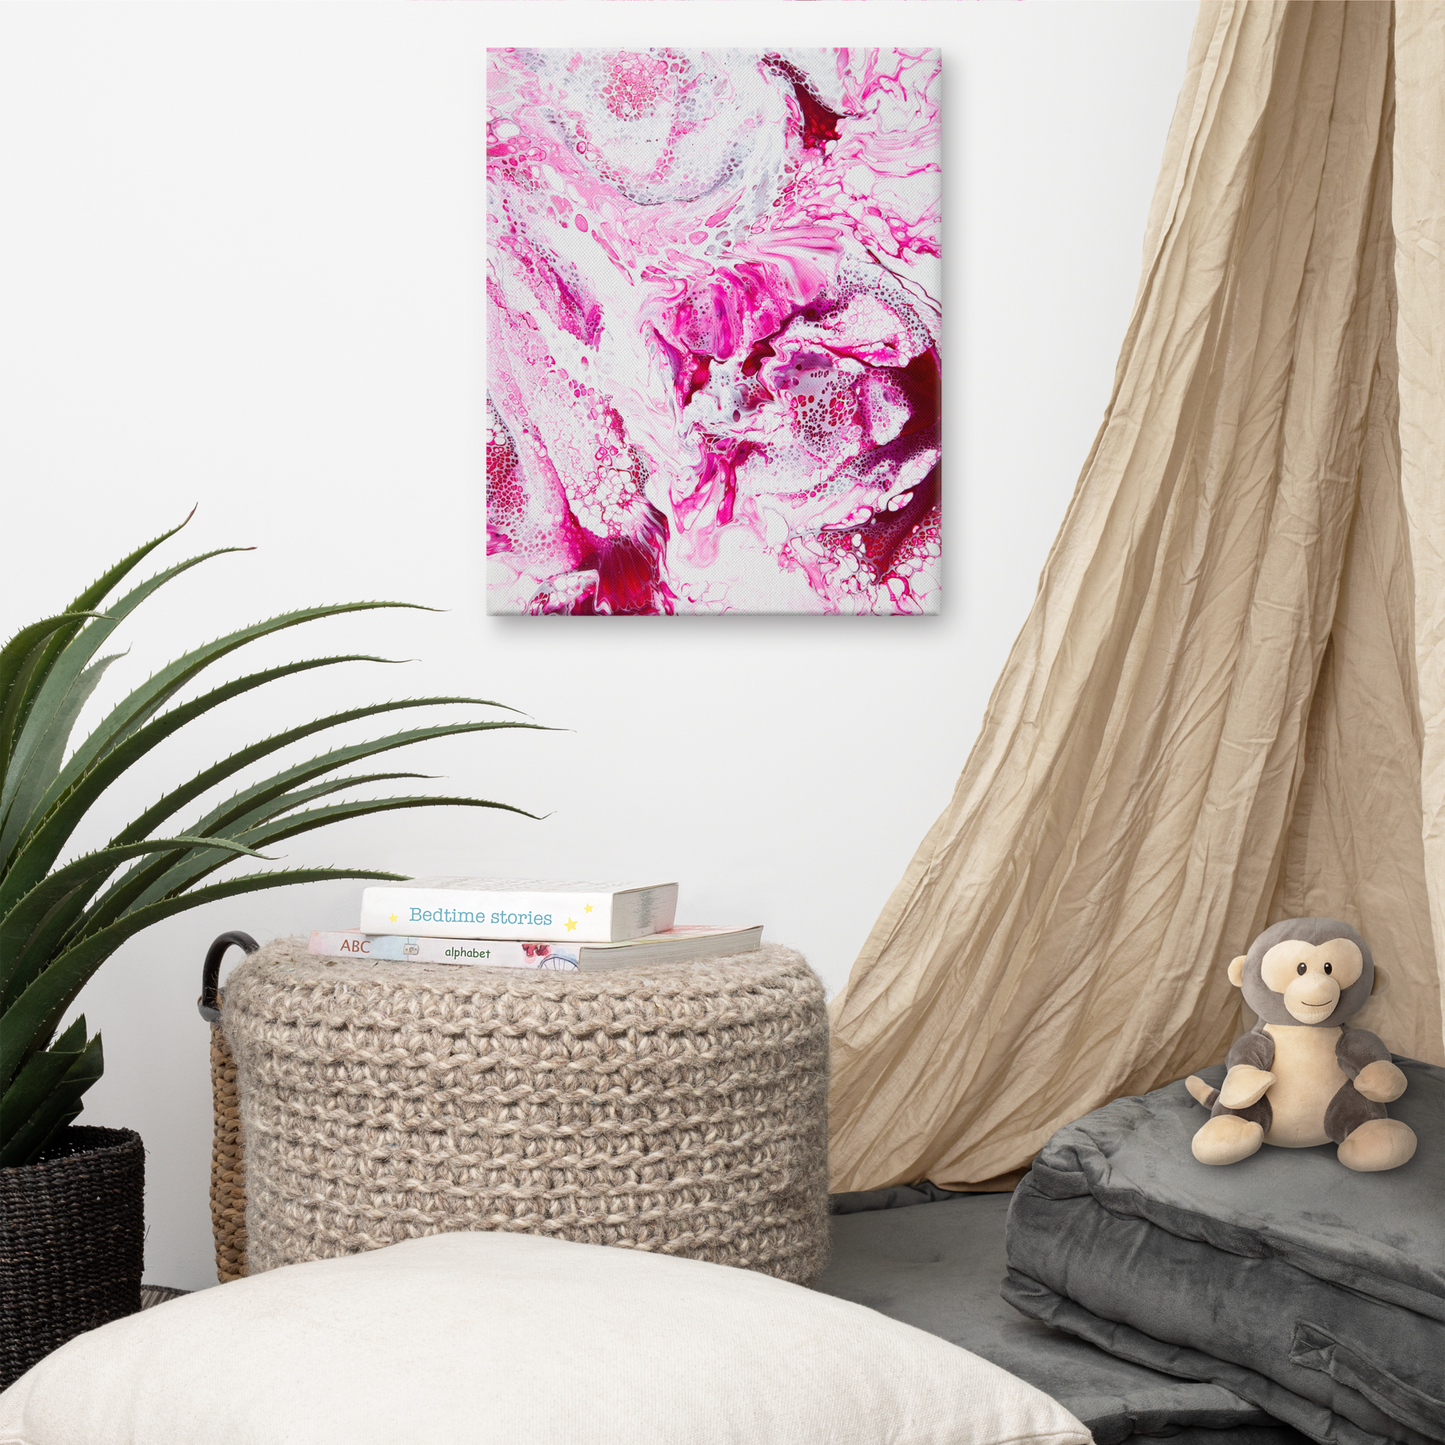 NightOwl Studio Abstract Wall Art, Pink Distortion, Boho Living Room, Bedroom, Office, and Home Decor, Premium Canvas with Wooden Frame, Acrylic Painting Reproduction, 16” x 20”